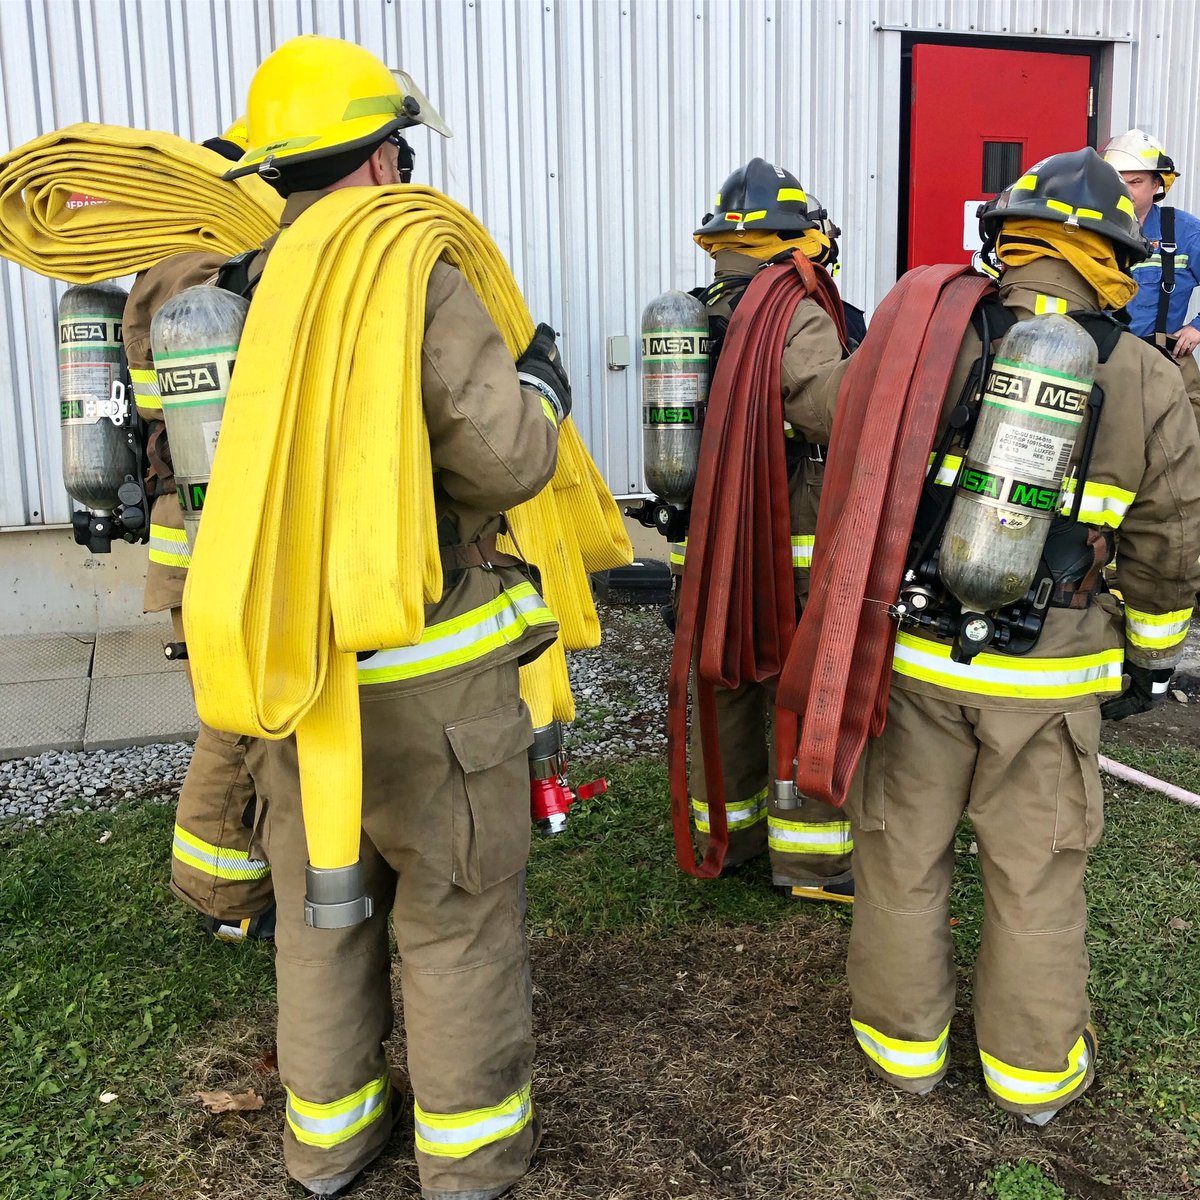 Another fantastic day with the fire crews in Eastern Ontario!🔥💦 
#emergencyresponseteam 
#firehousetraining #workplacesafety #ertteam #firealarm #industrialworkplace #firesafetyplan #hosestretch